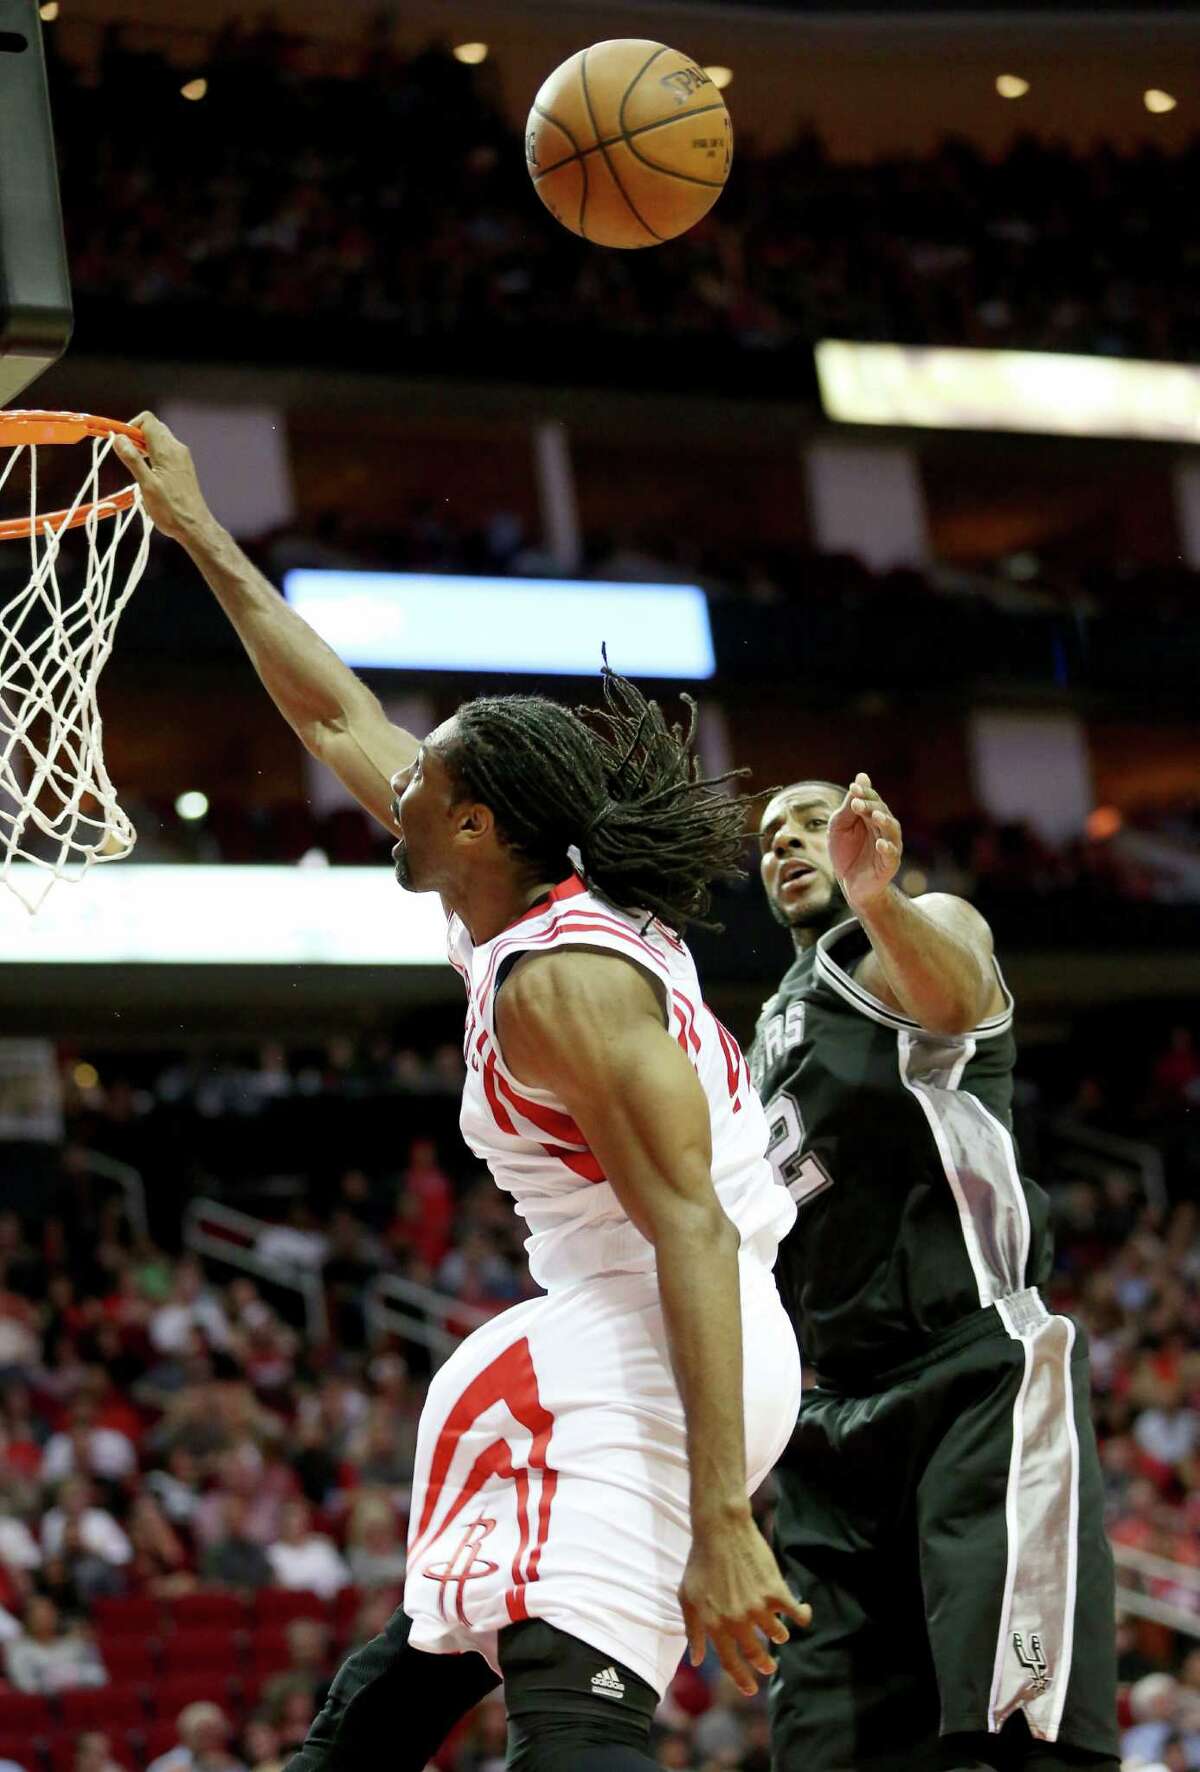 The ball didn't bounce the way of Nene and the Rockets in a loss to the Spurs on Nov. 12, but that's the night James Harden cites as when the team became fully attuned to coach Mike D'Antoni's preferred style of play.